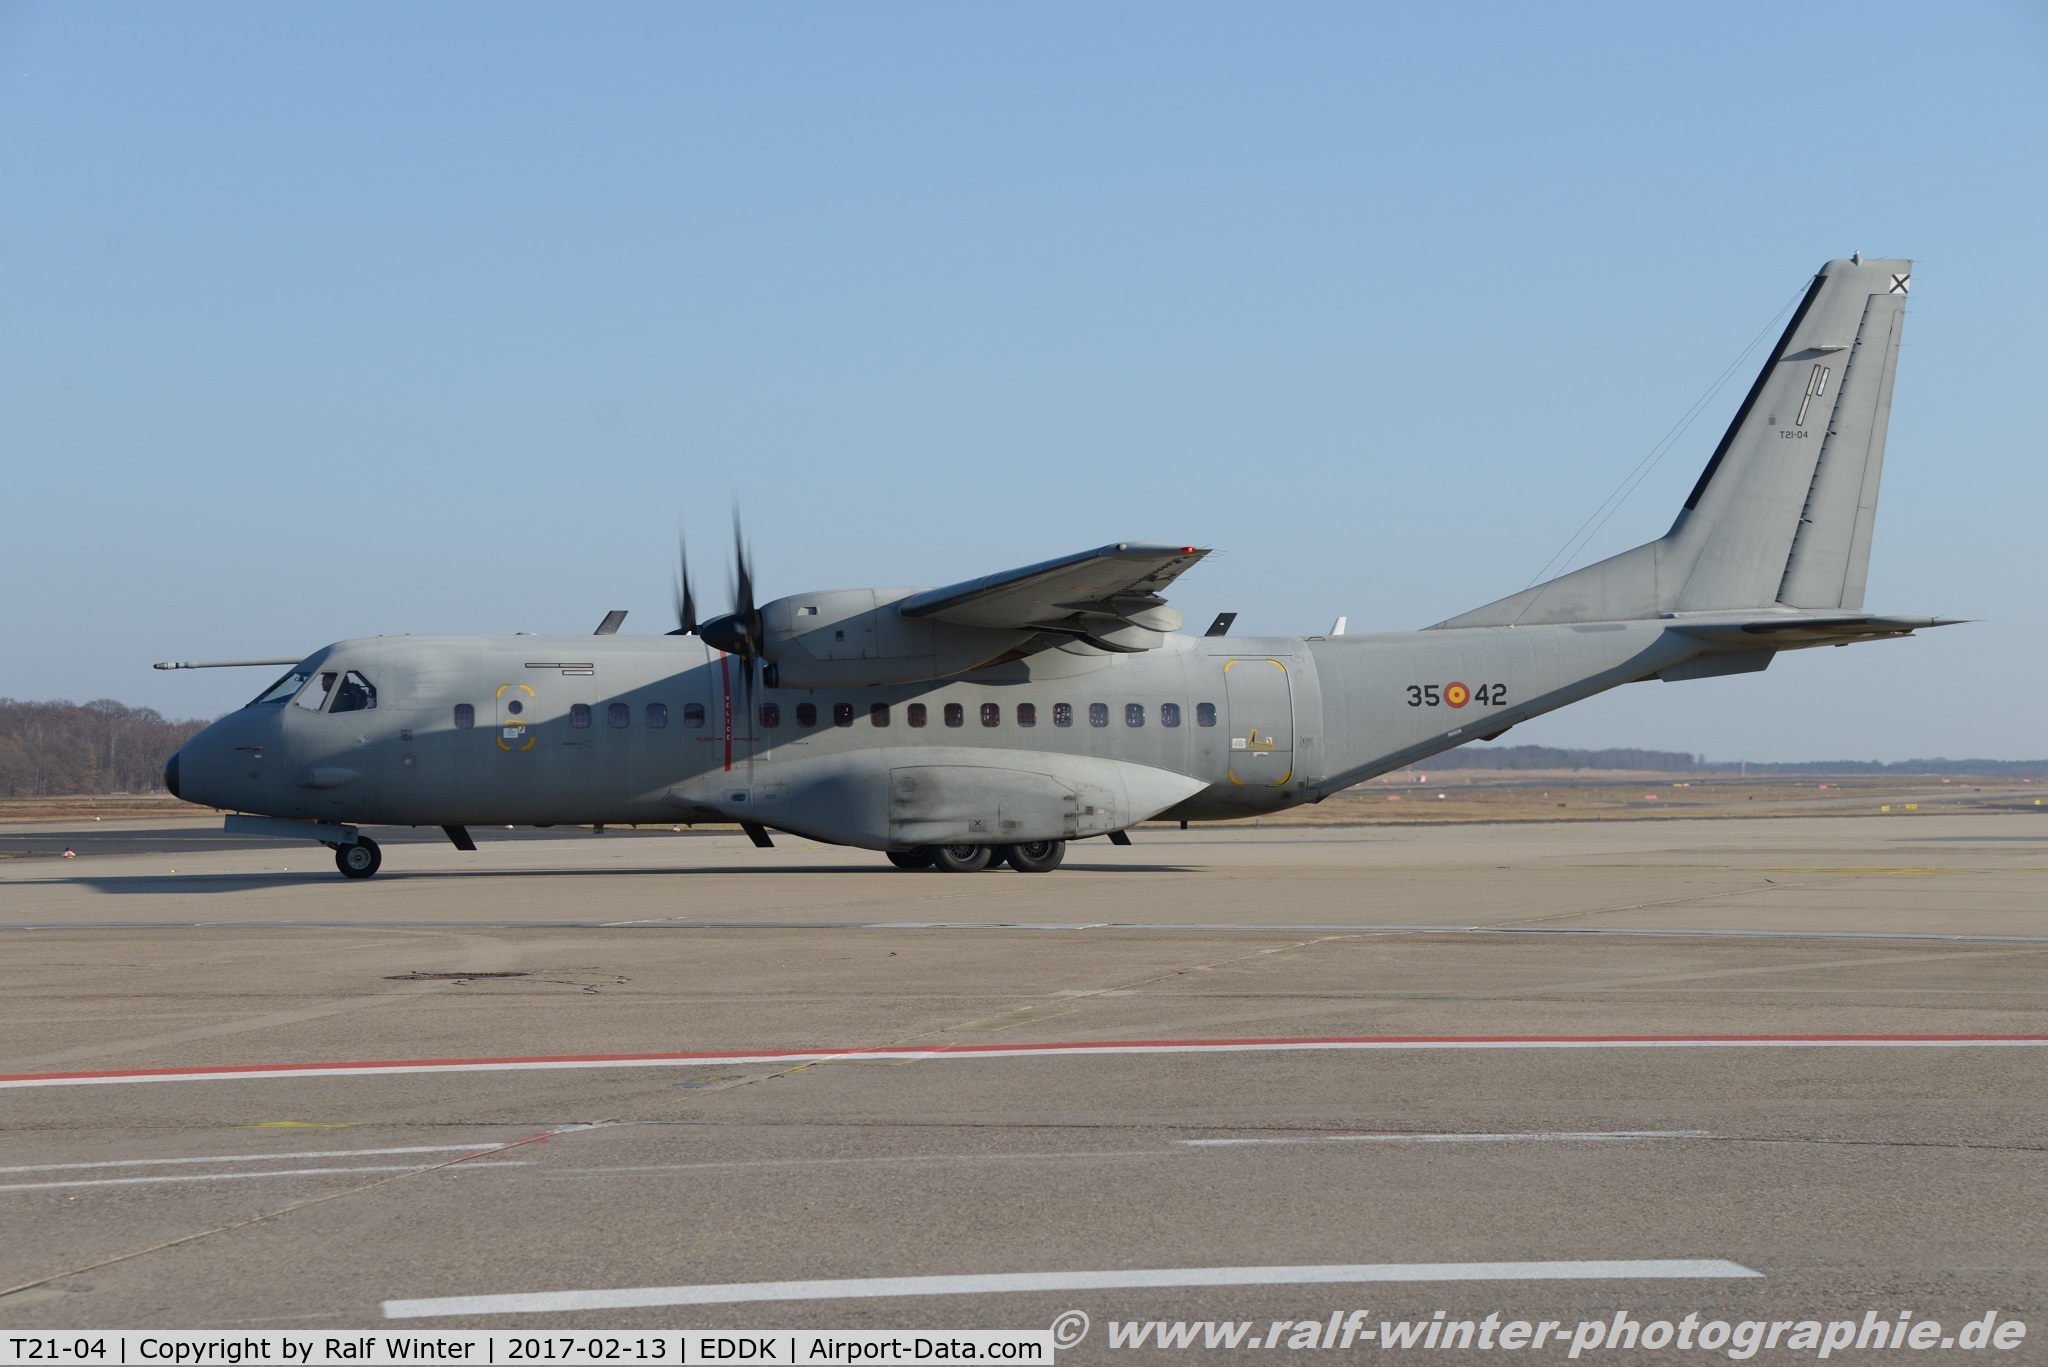 T21-04, 2003 CASA C-295M C/N EA03-04-005, CASA C-295M - AME Spanish Air Force - 005 - T.21-04 - 13.02.2017 - CGN